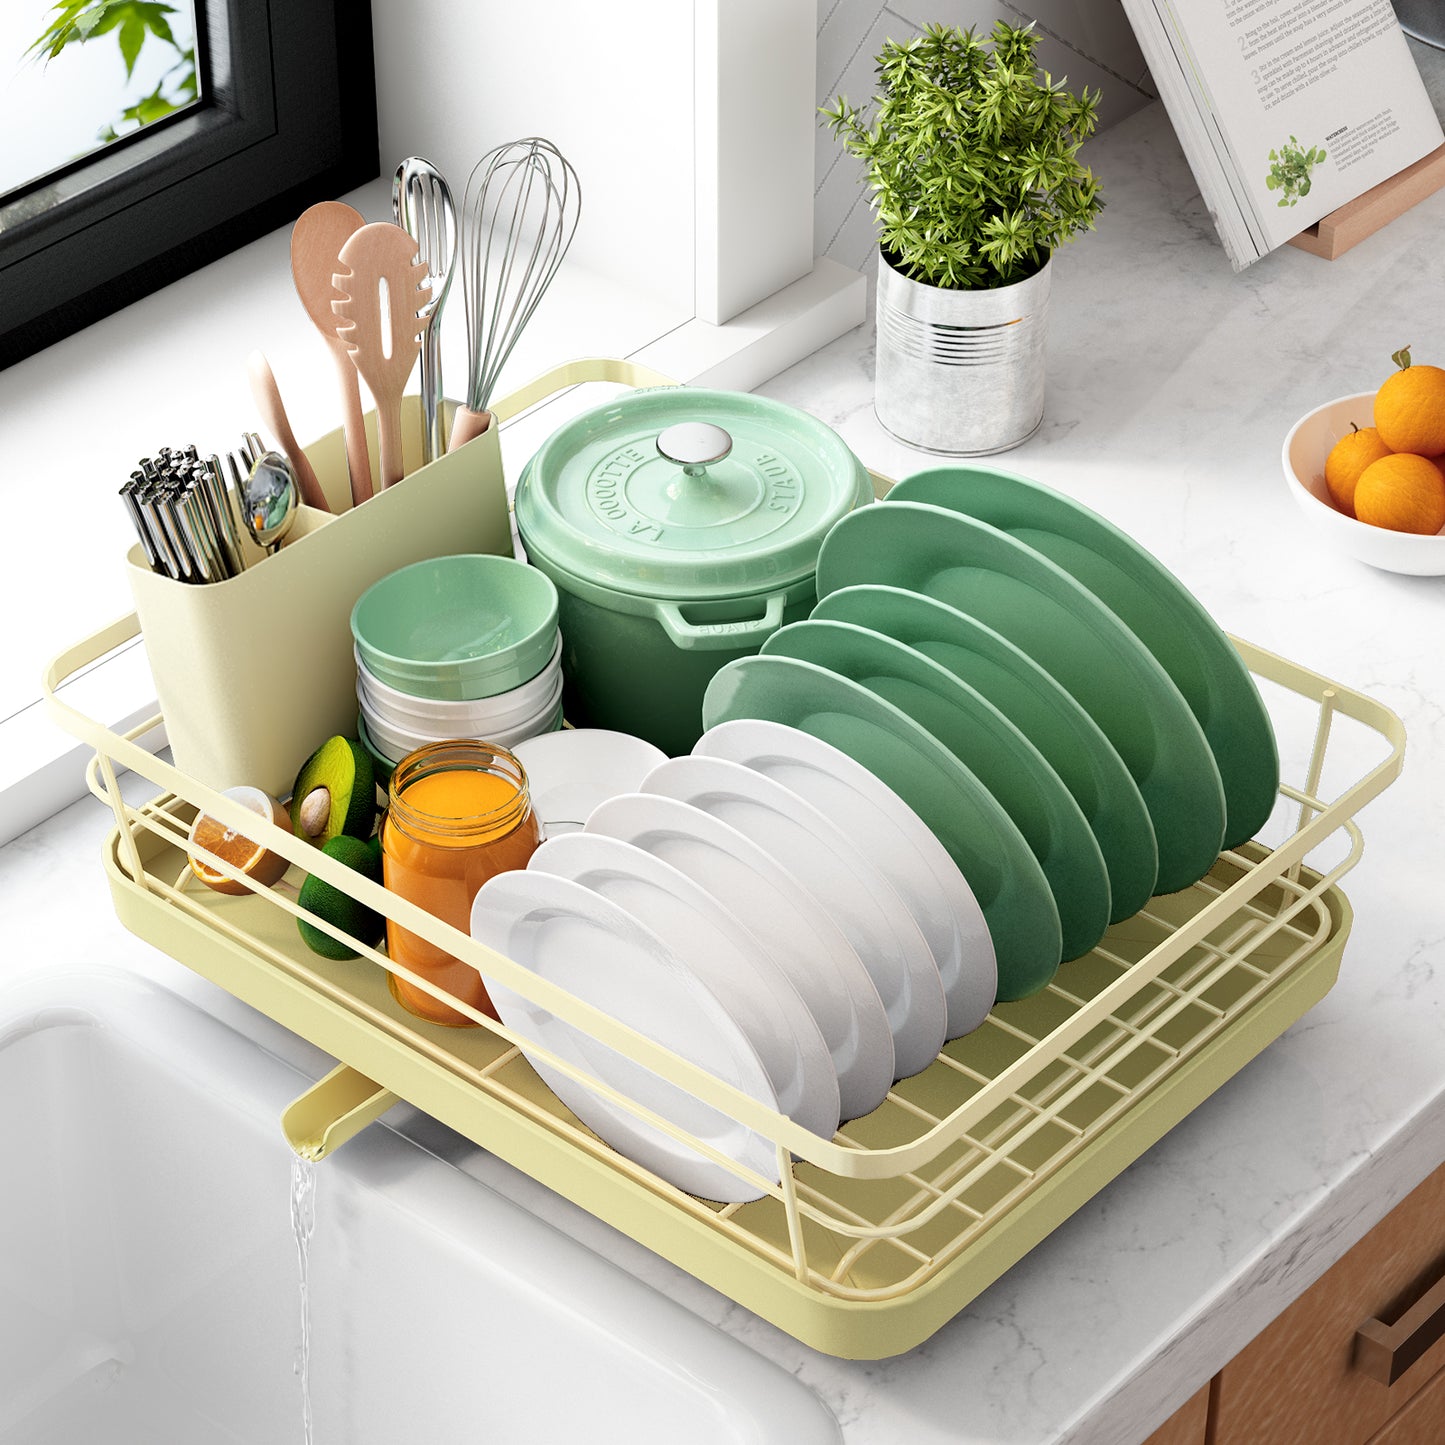 Covered Dish Rack With Drainer Price In Pakistan